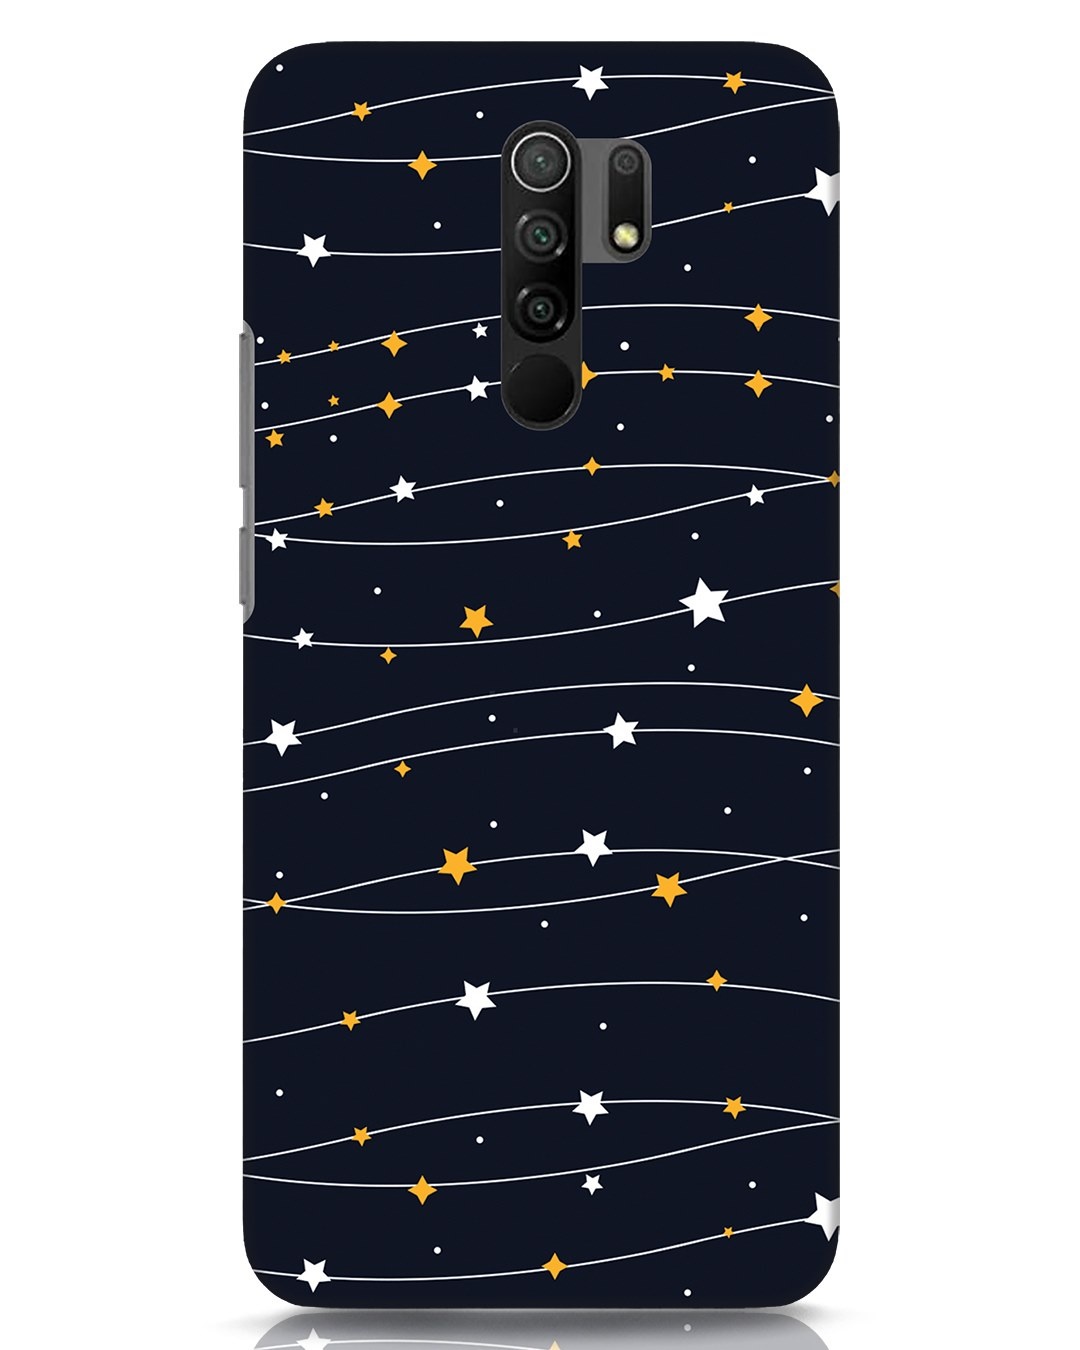 Buy Stary Xiaomi Redmi 9 Prime Mobile Covers Online In India At Bewakoof 6980